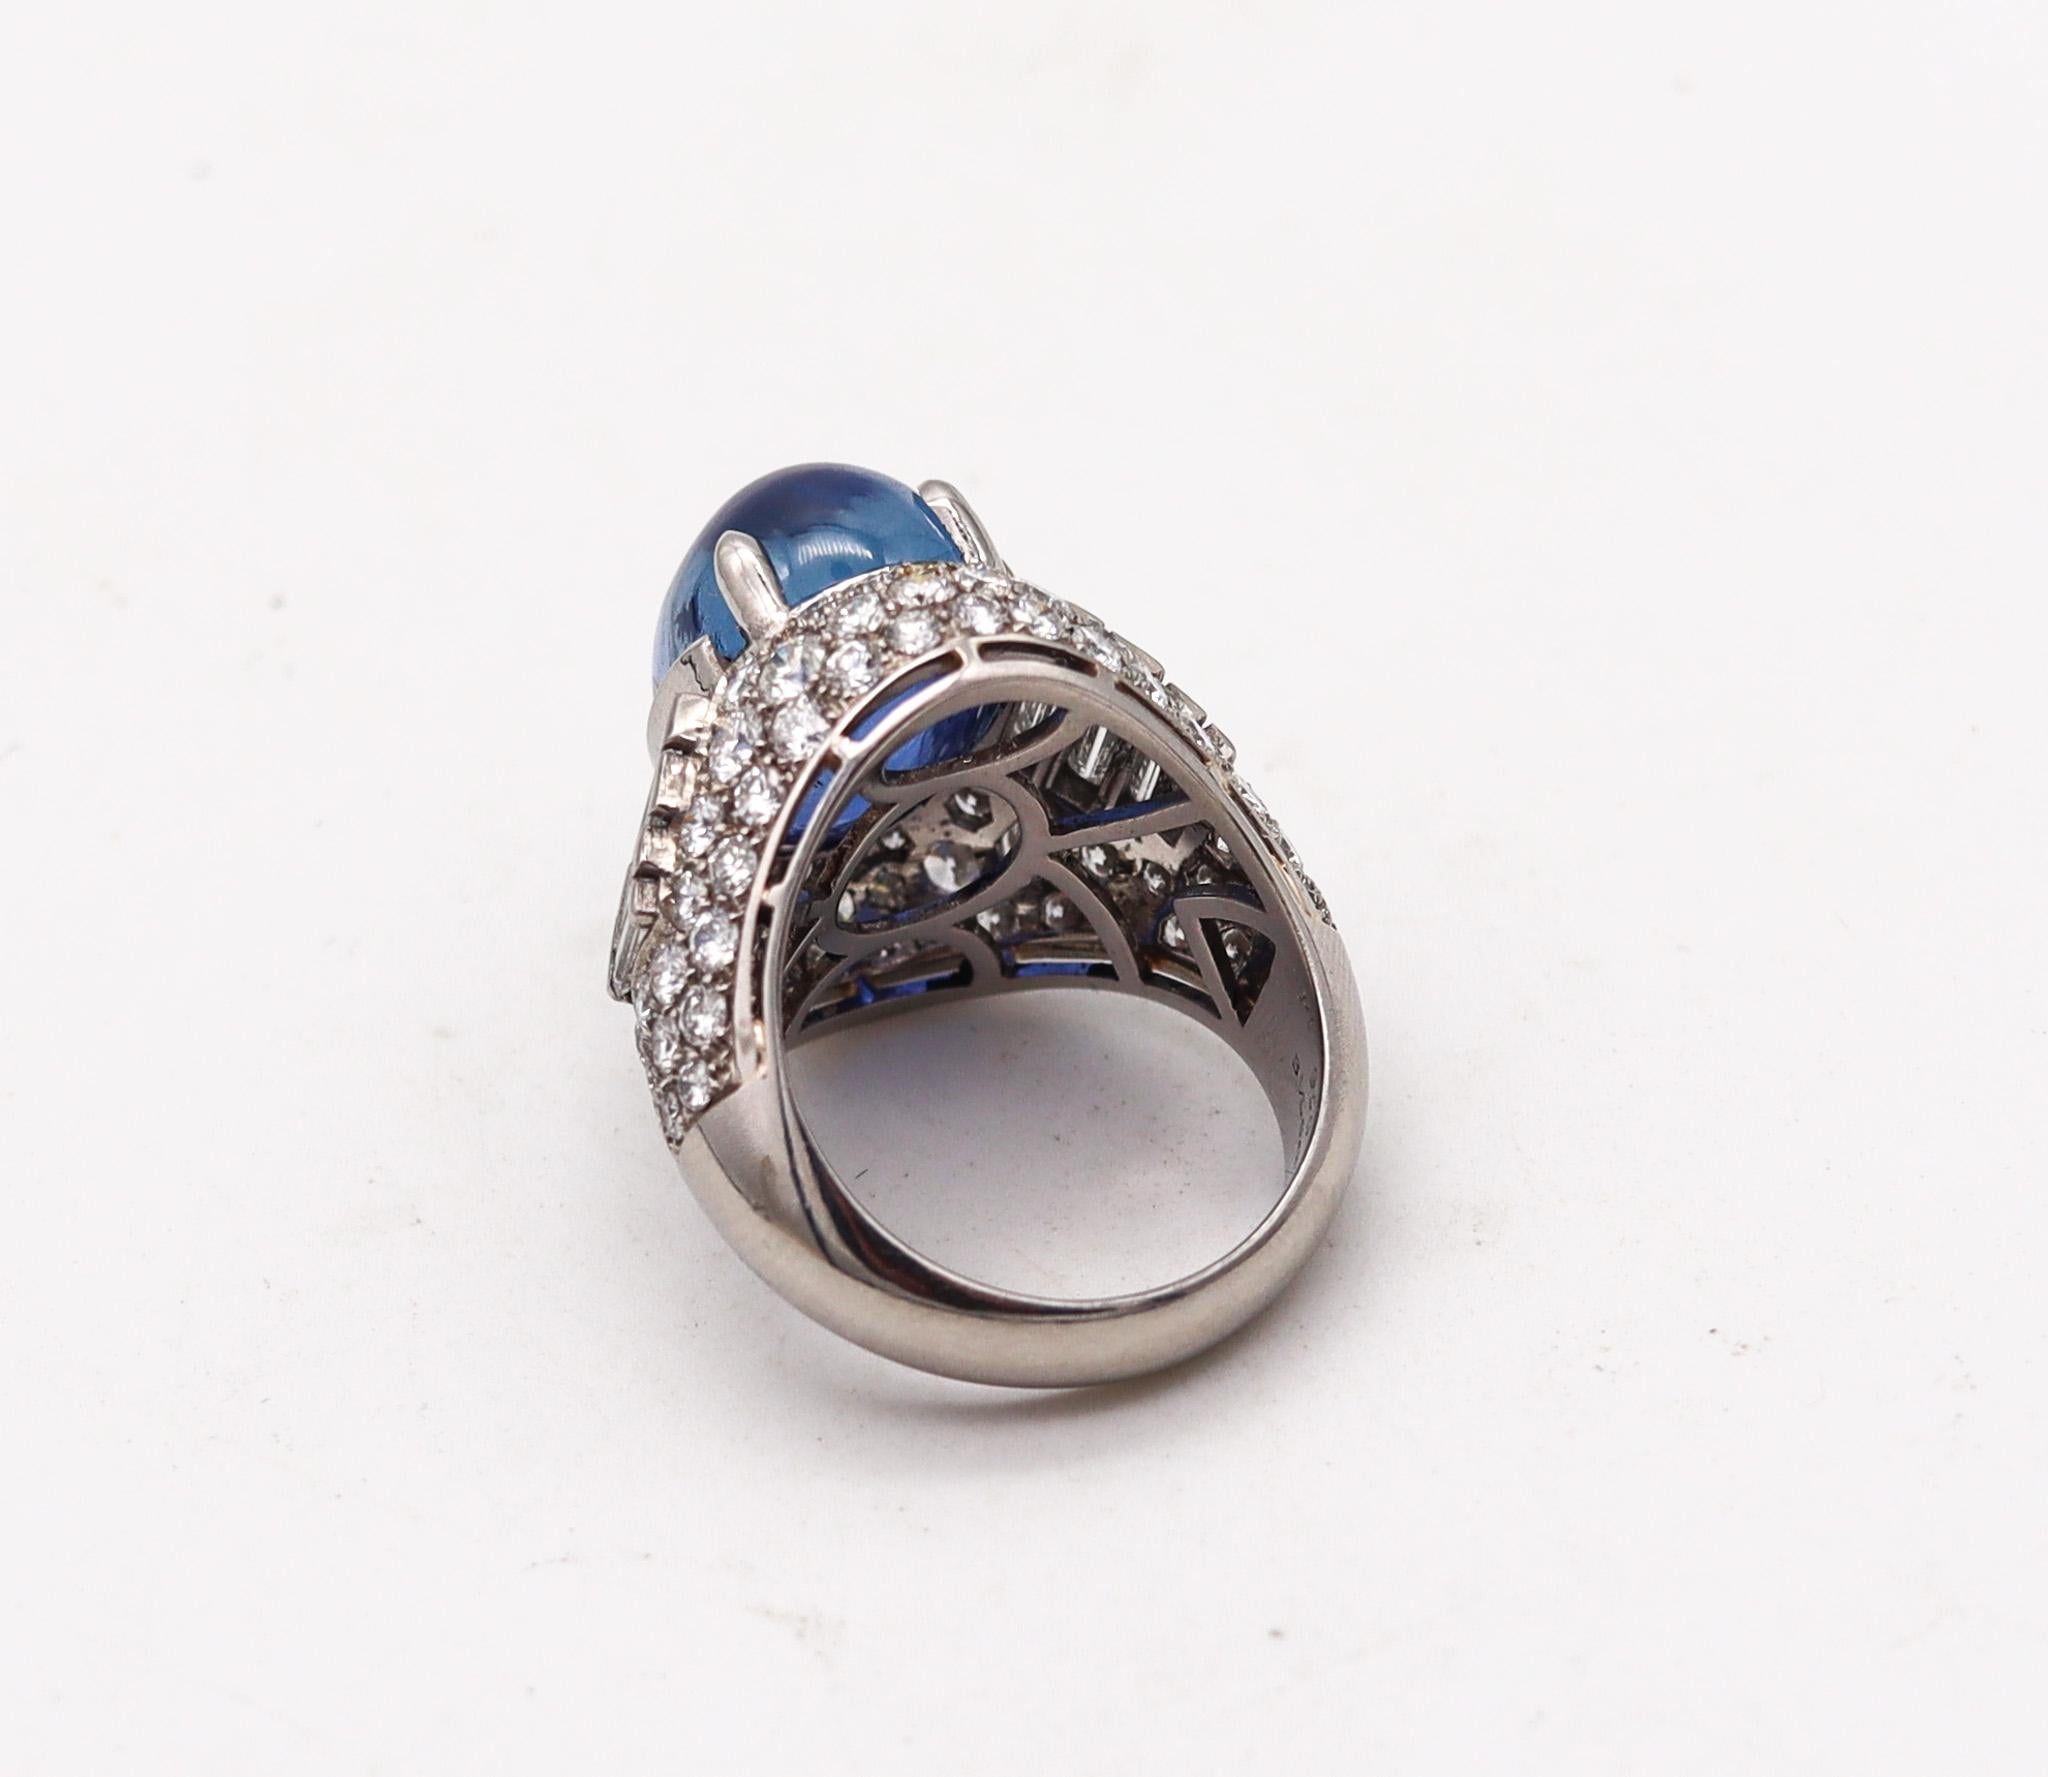 Mixed Cut Bvlgari Trombino Cocktail Ring In Platinum With 21.88 Ctw In Diamonds & Sapphire For Sale